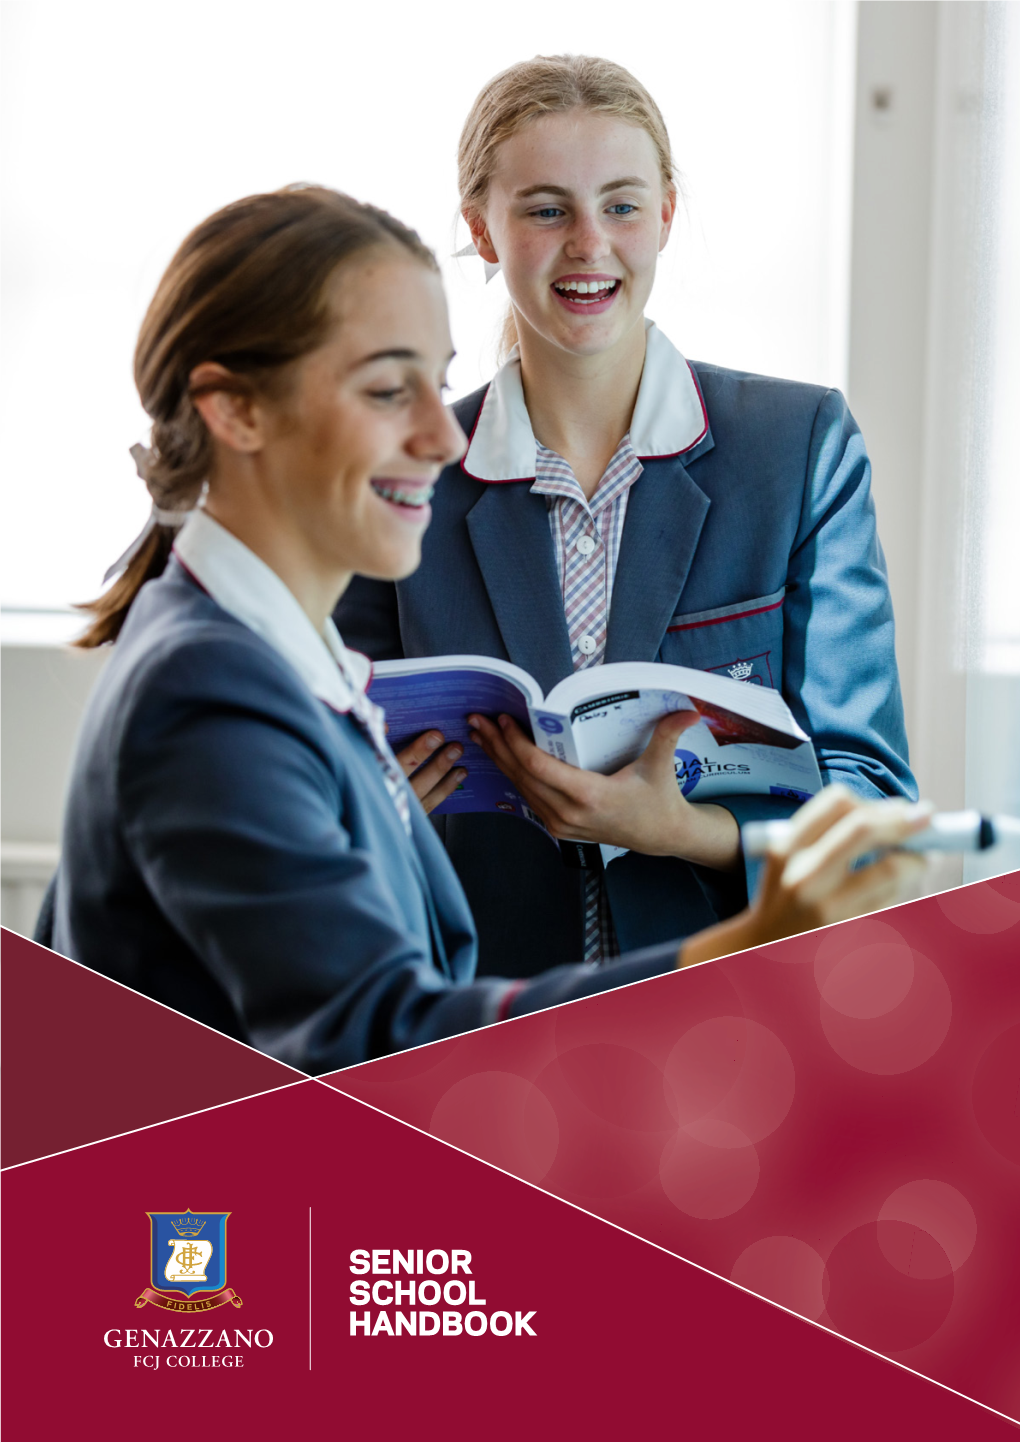 SENIOR SCHOOL HANDBOOK OUR VALUES COURAGE and Contents CONFIDENCE